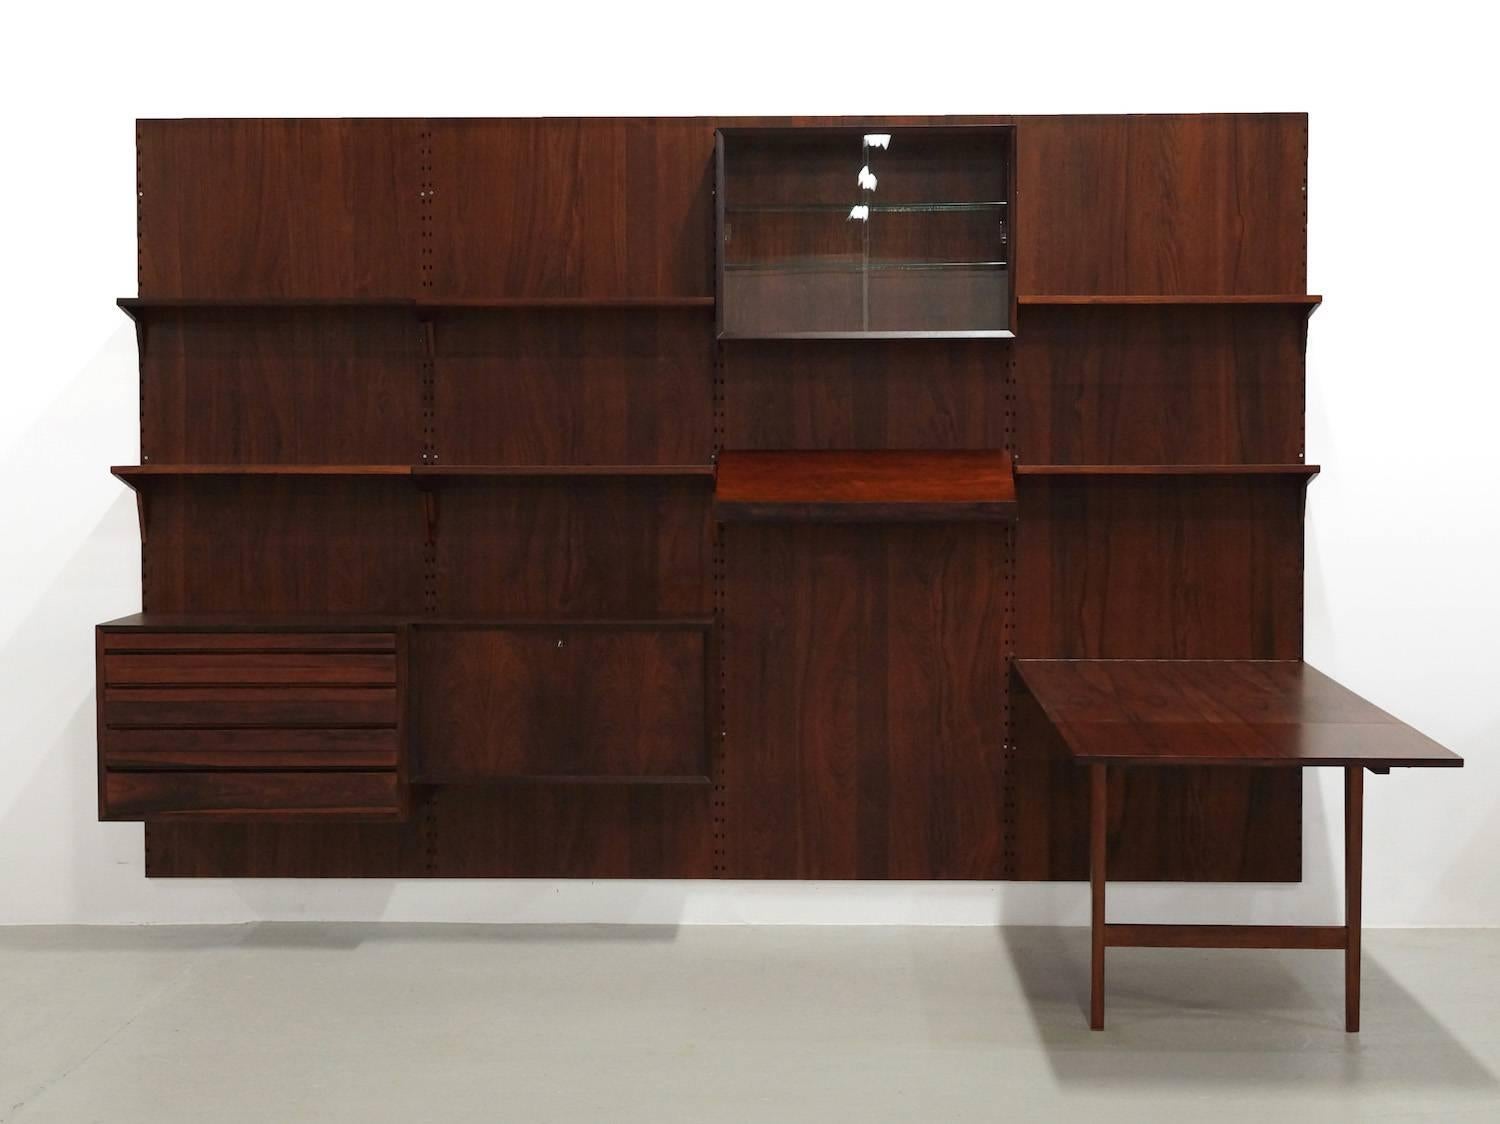 Beautiful modular wall unit from Poul Cadovius for Cado, Denmark, 1950s in Mahogany
This four unit modular wall systems can be built in any way you want it, to make it your own. 
The extendable table this unit is something unique that we have never